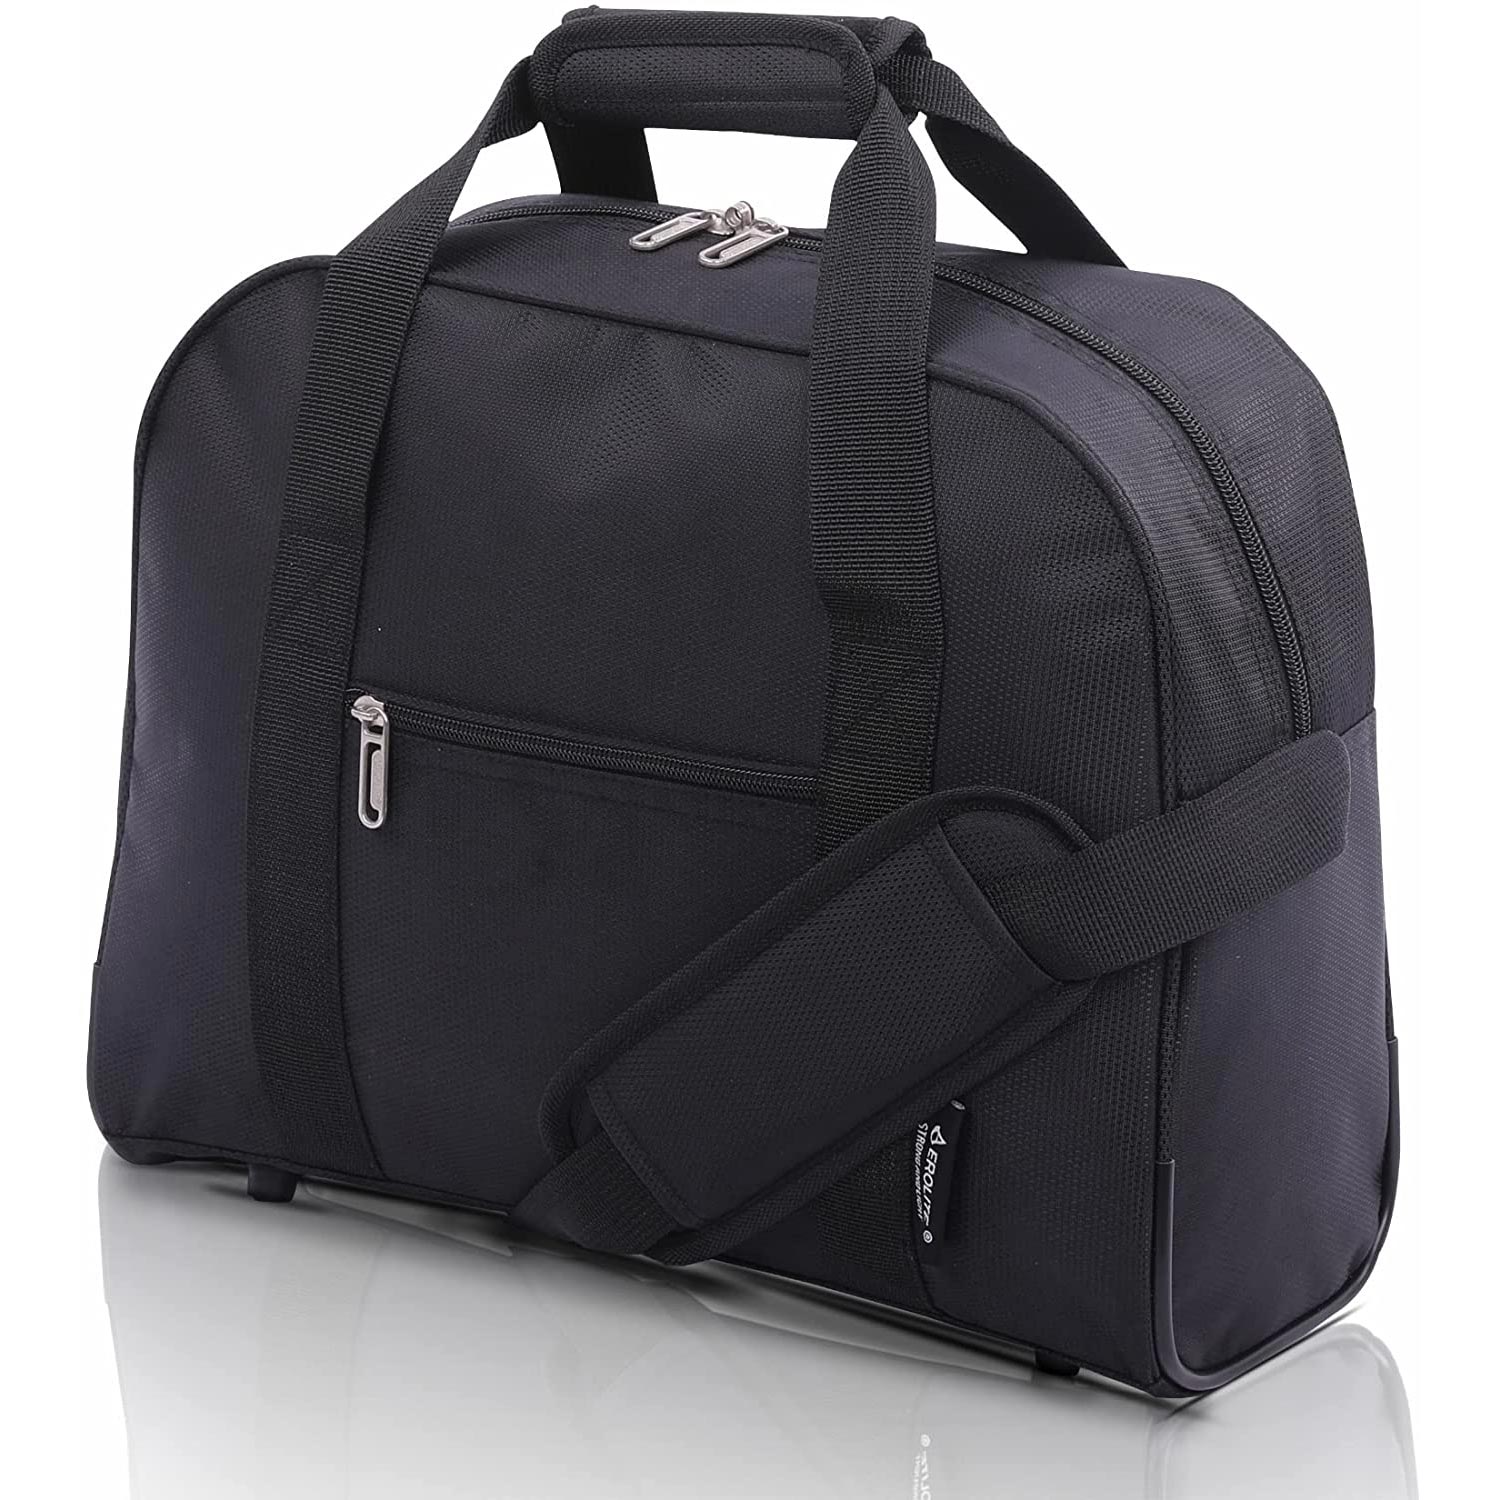 AEROLITE (40x30x15cm) New and Improved 2023 British Airways Maximum Cabin Size, Approved For EasyJet/SAS/TAP & Many More, Cabin Luggage Under Seat Flight Bag, Black